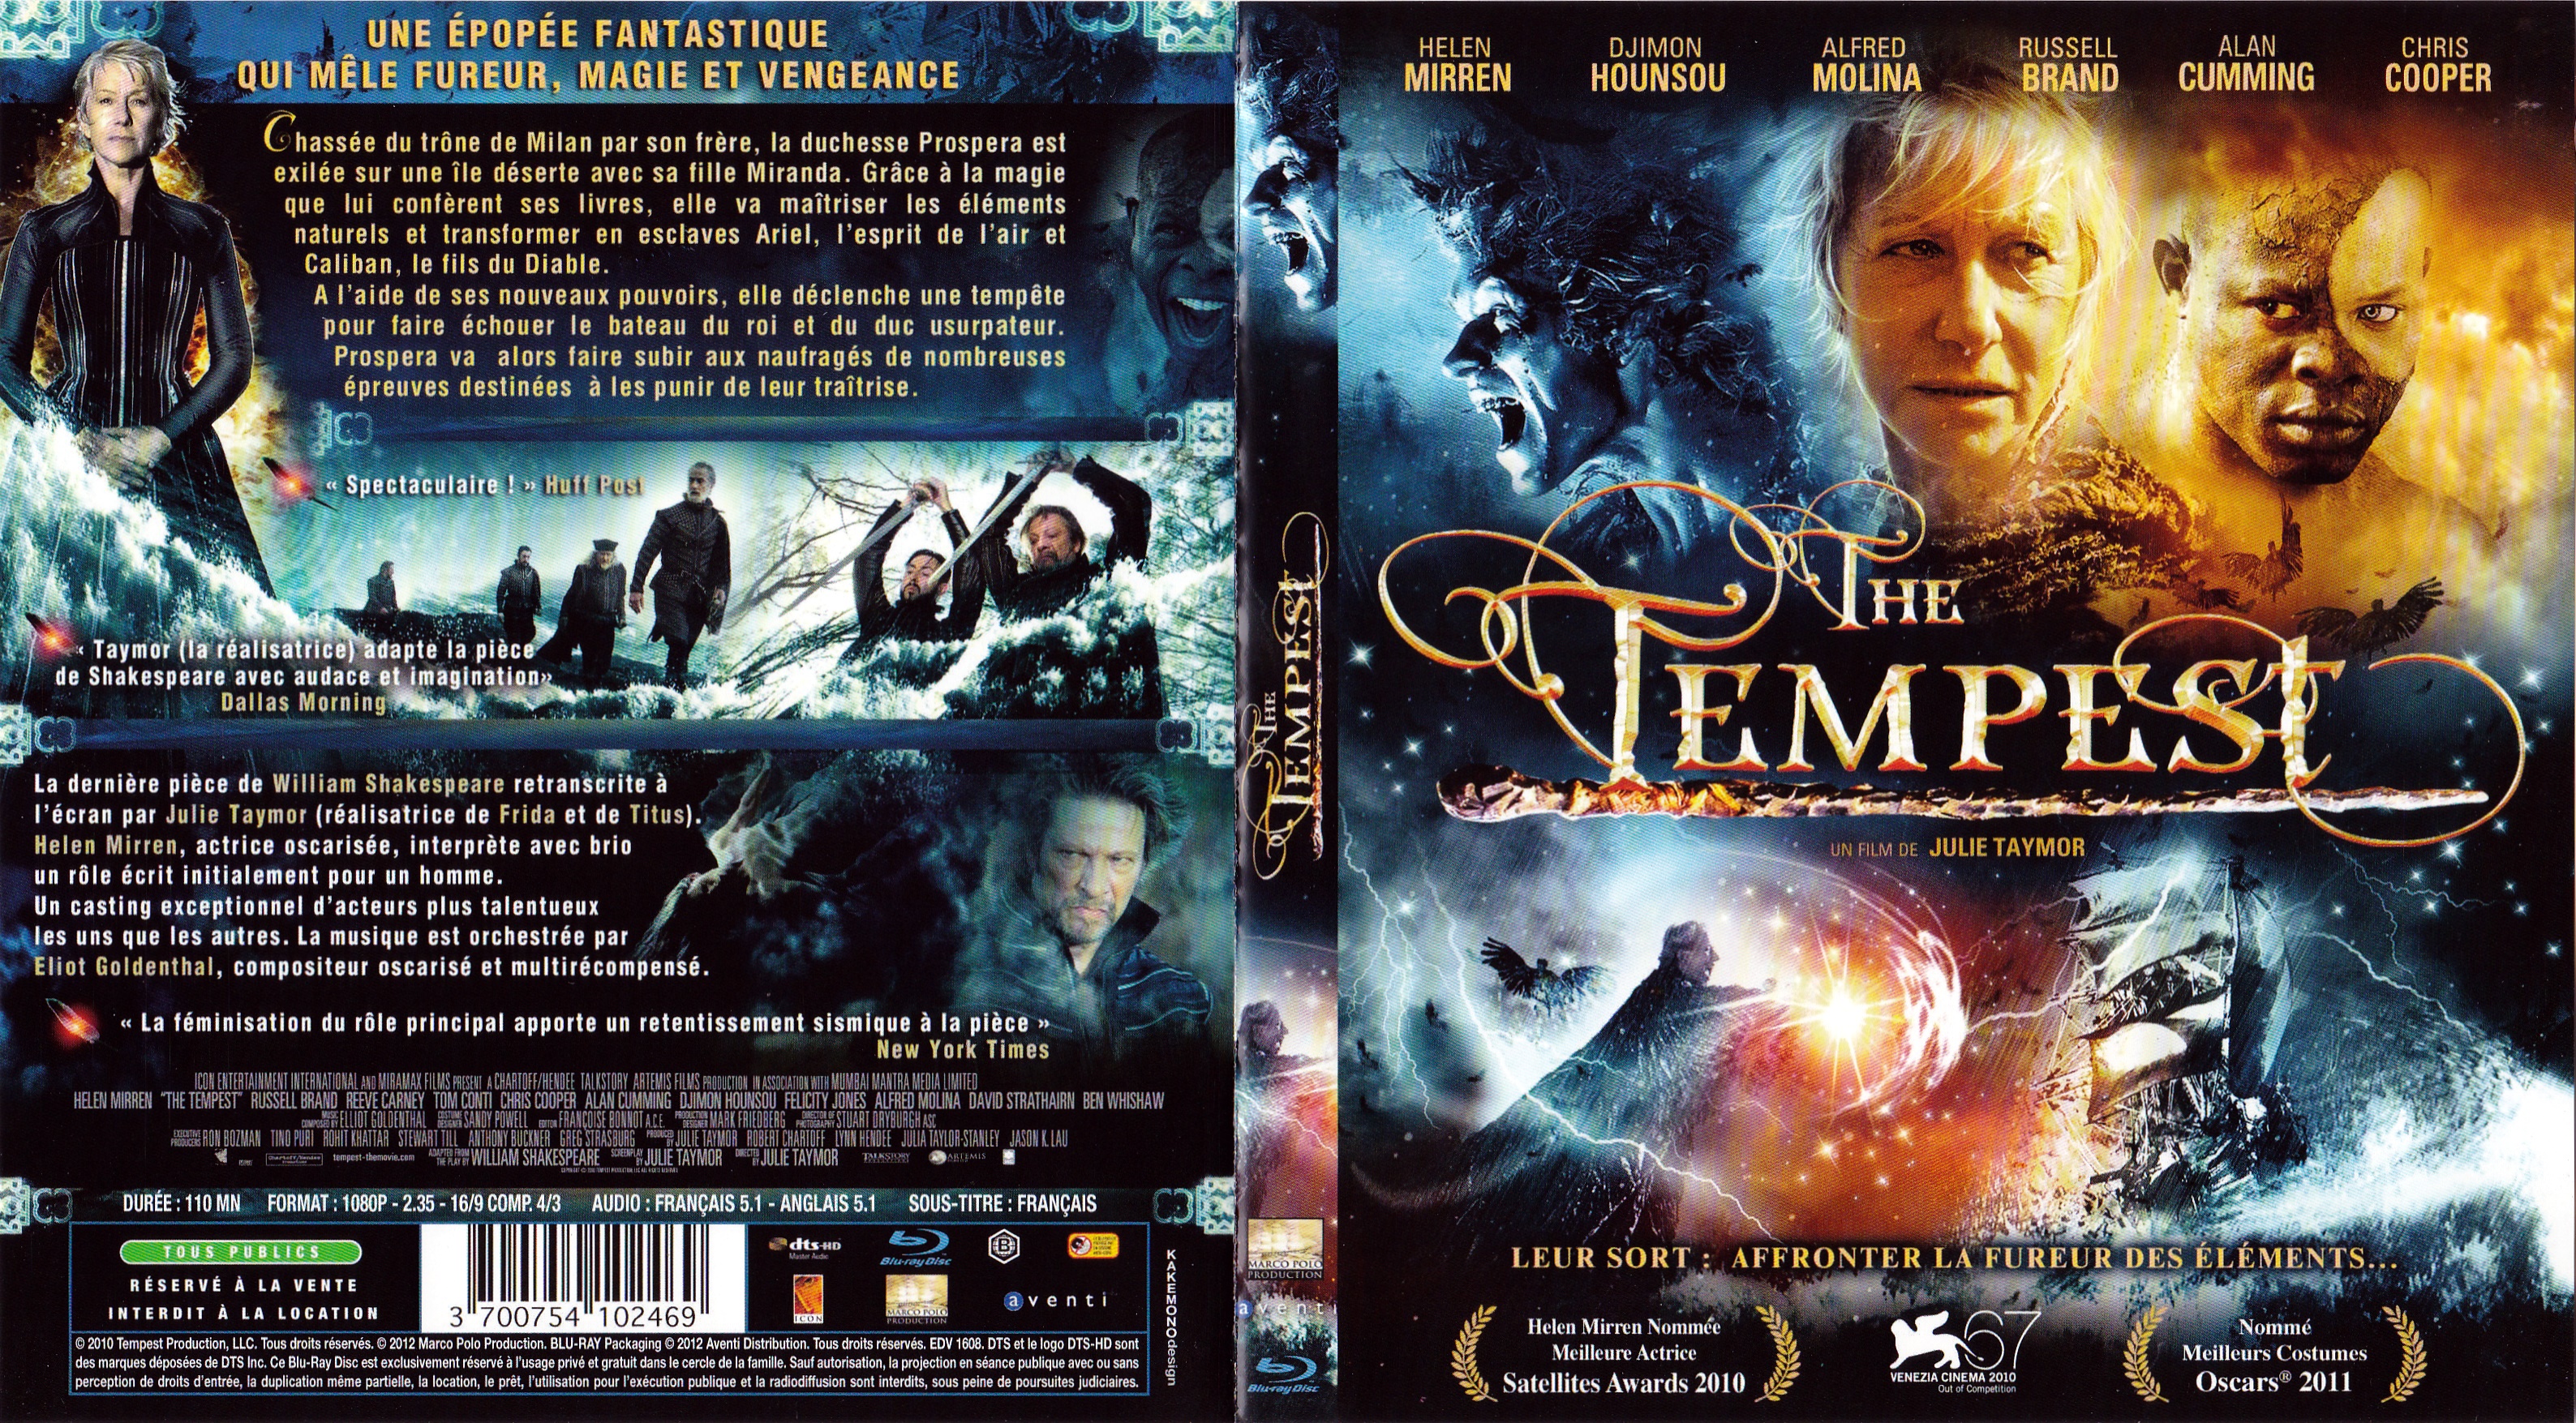 Jaquette DVD The tempest (BLU-RAY)